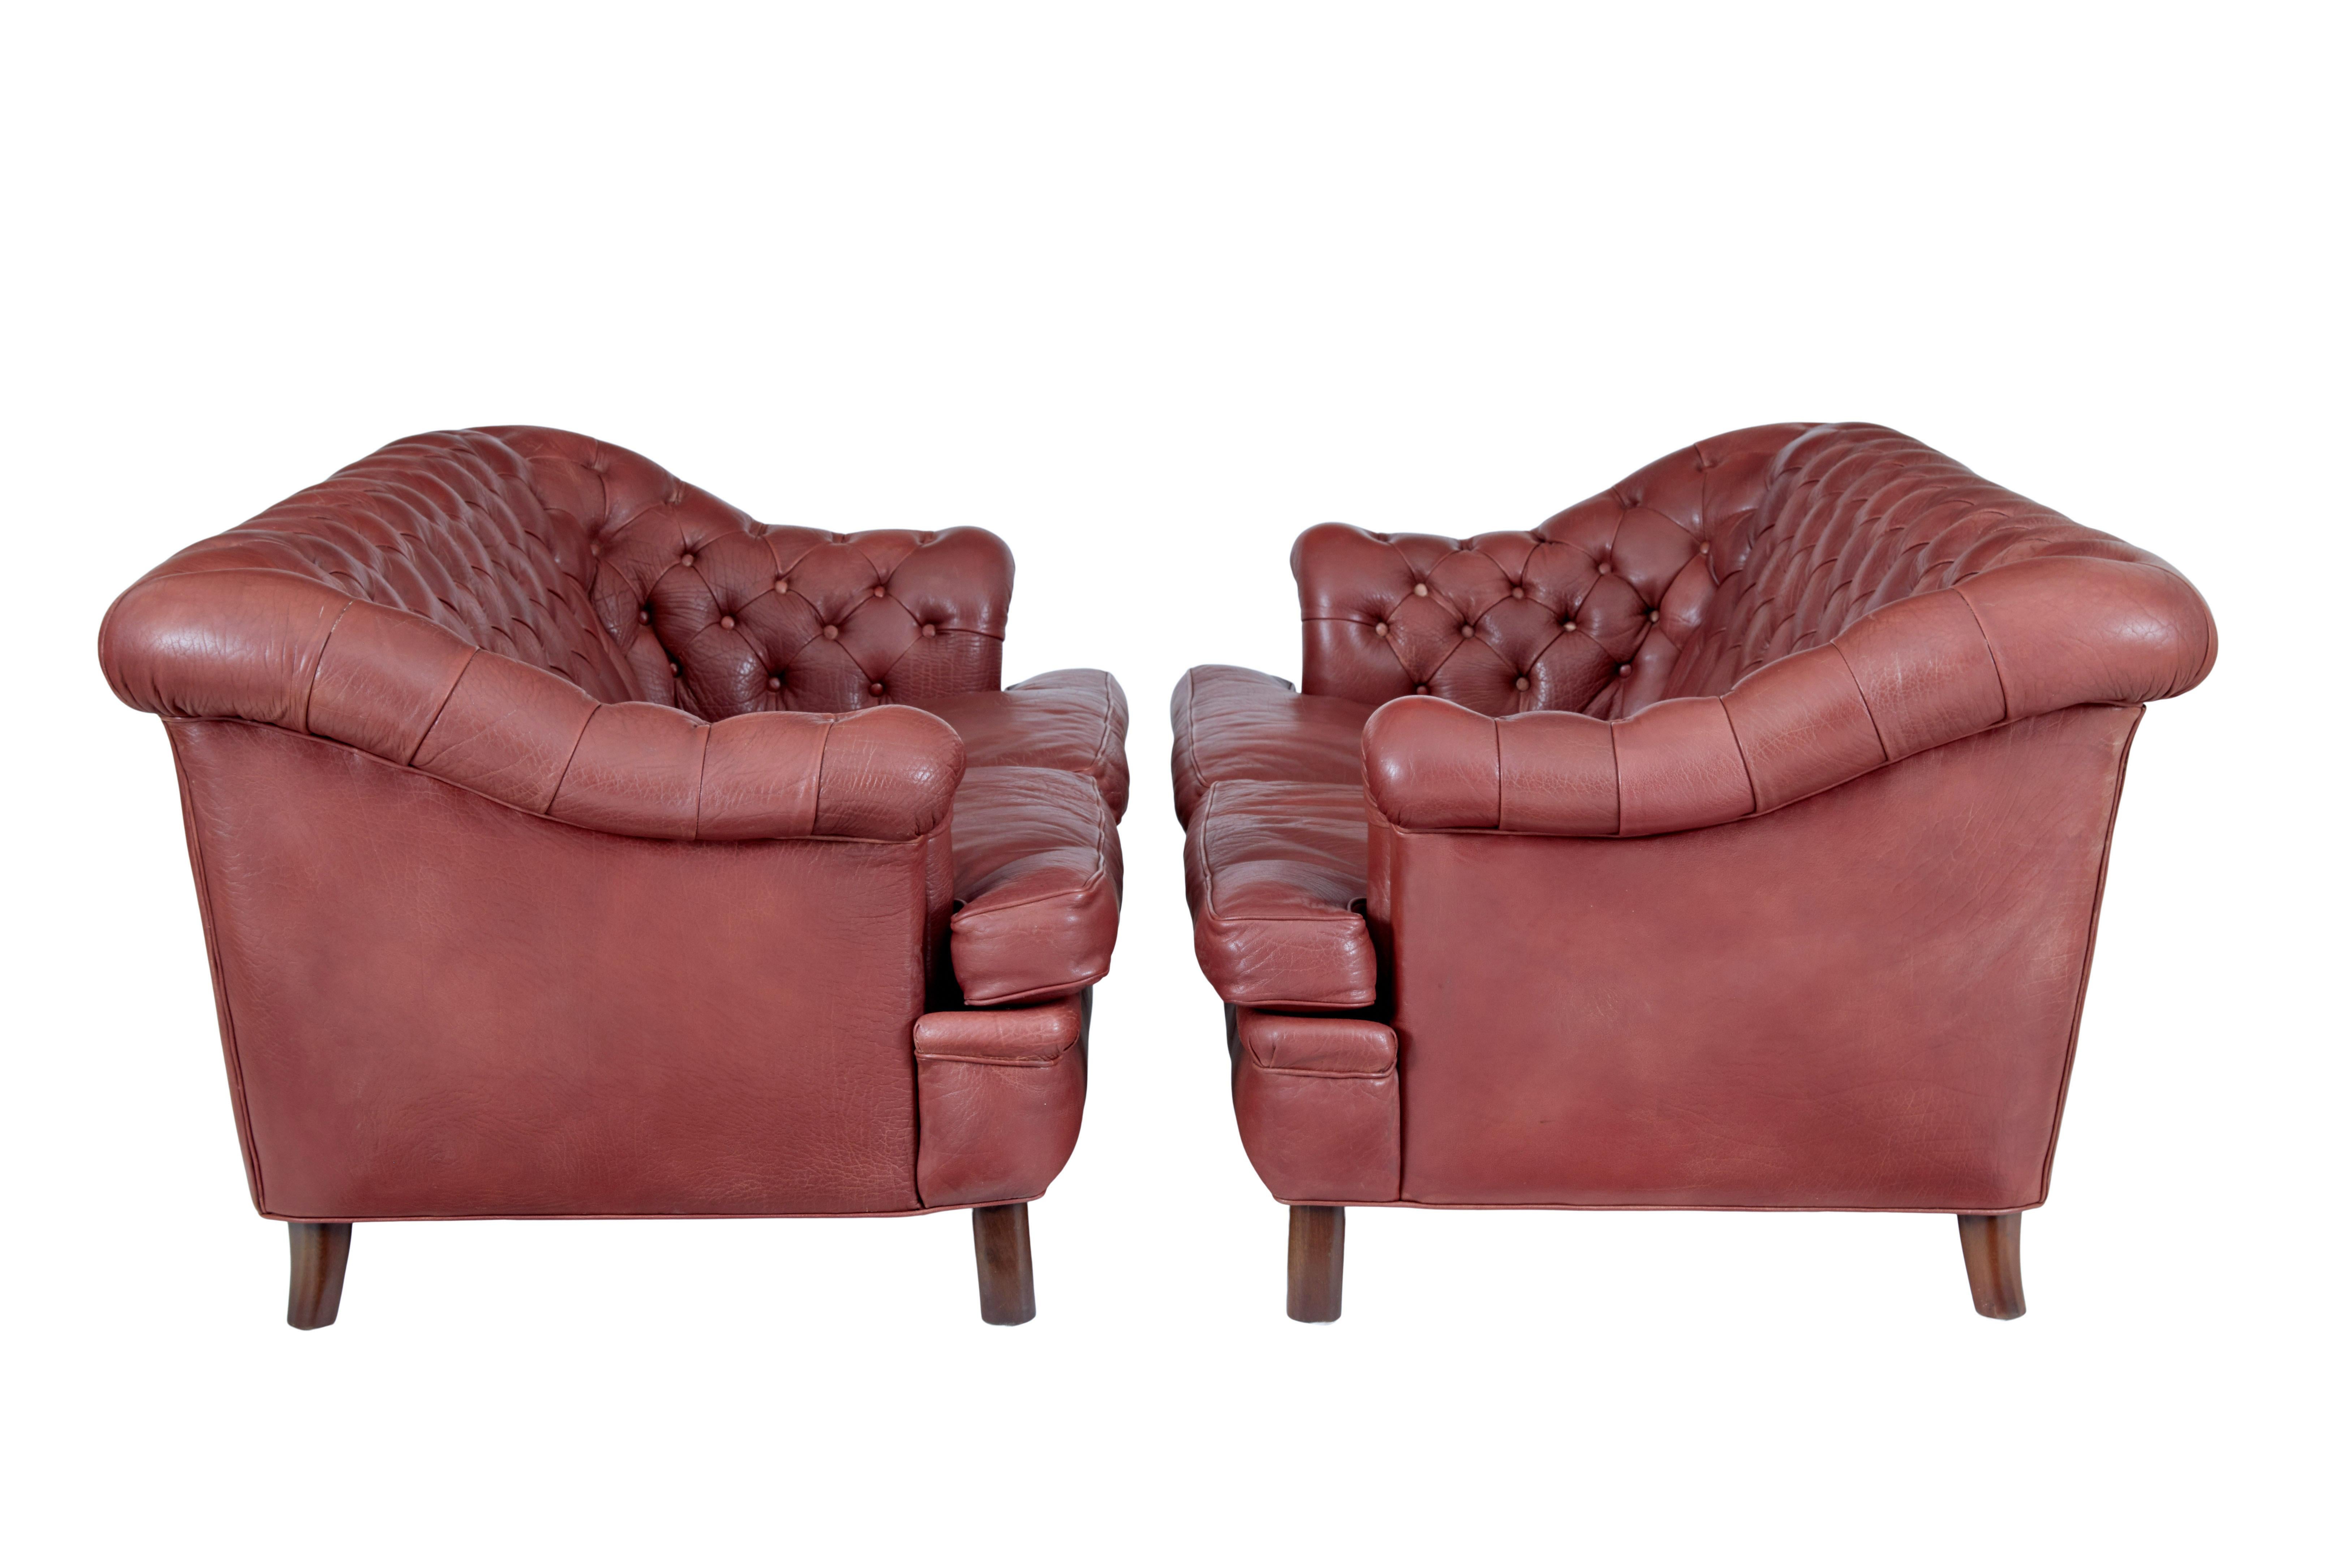 Hand-Crafted Pair of mid 20th century leather Chesterfield sofas For Sale